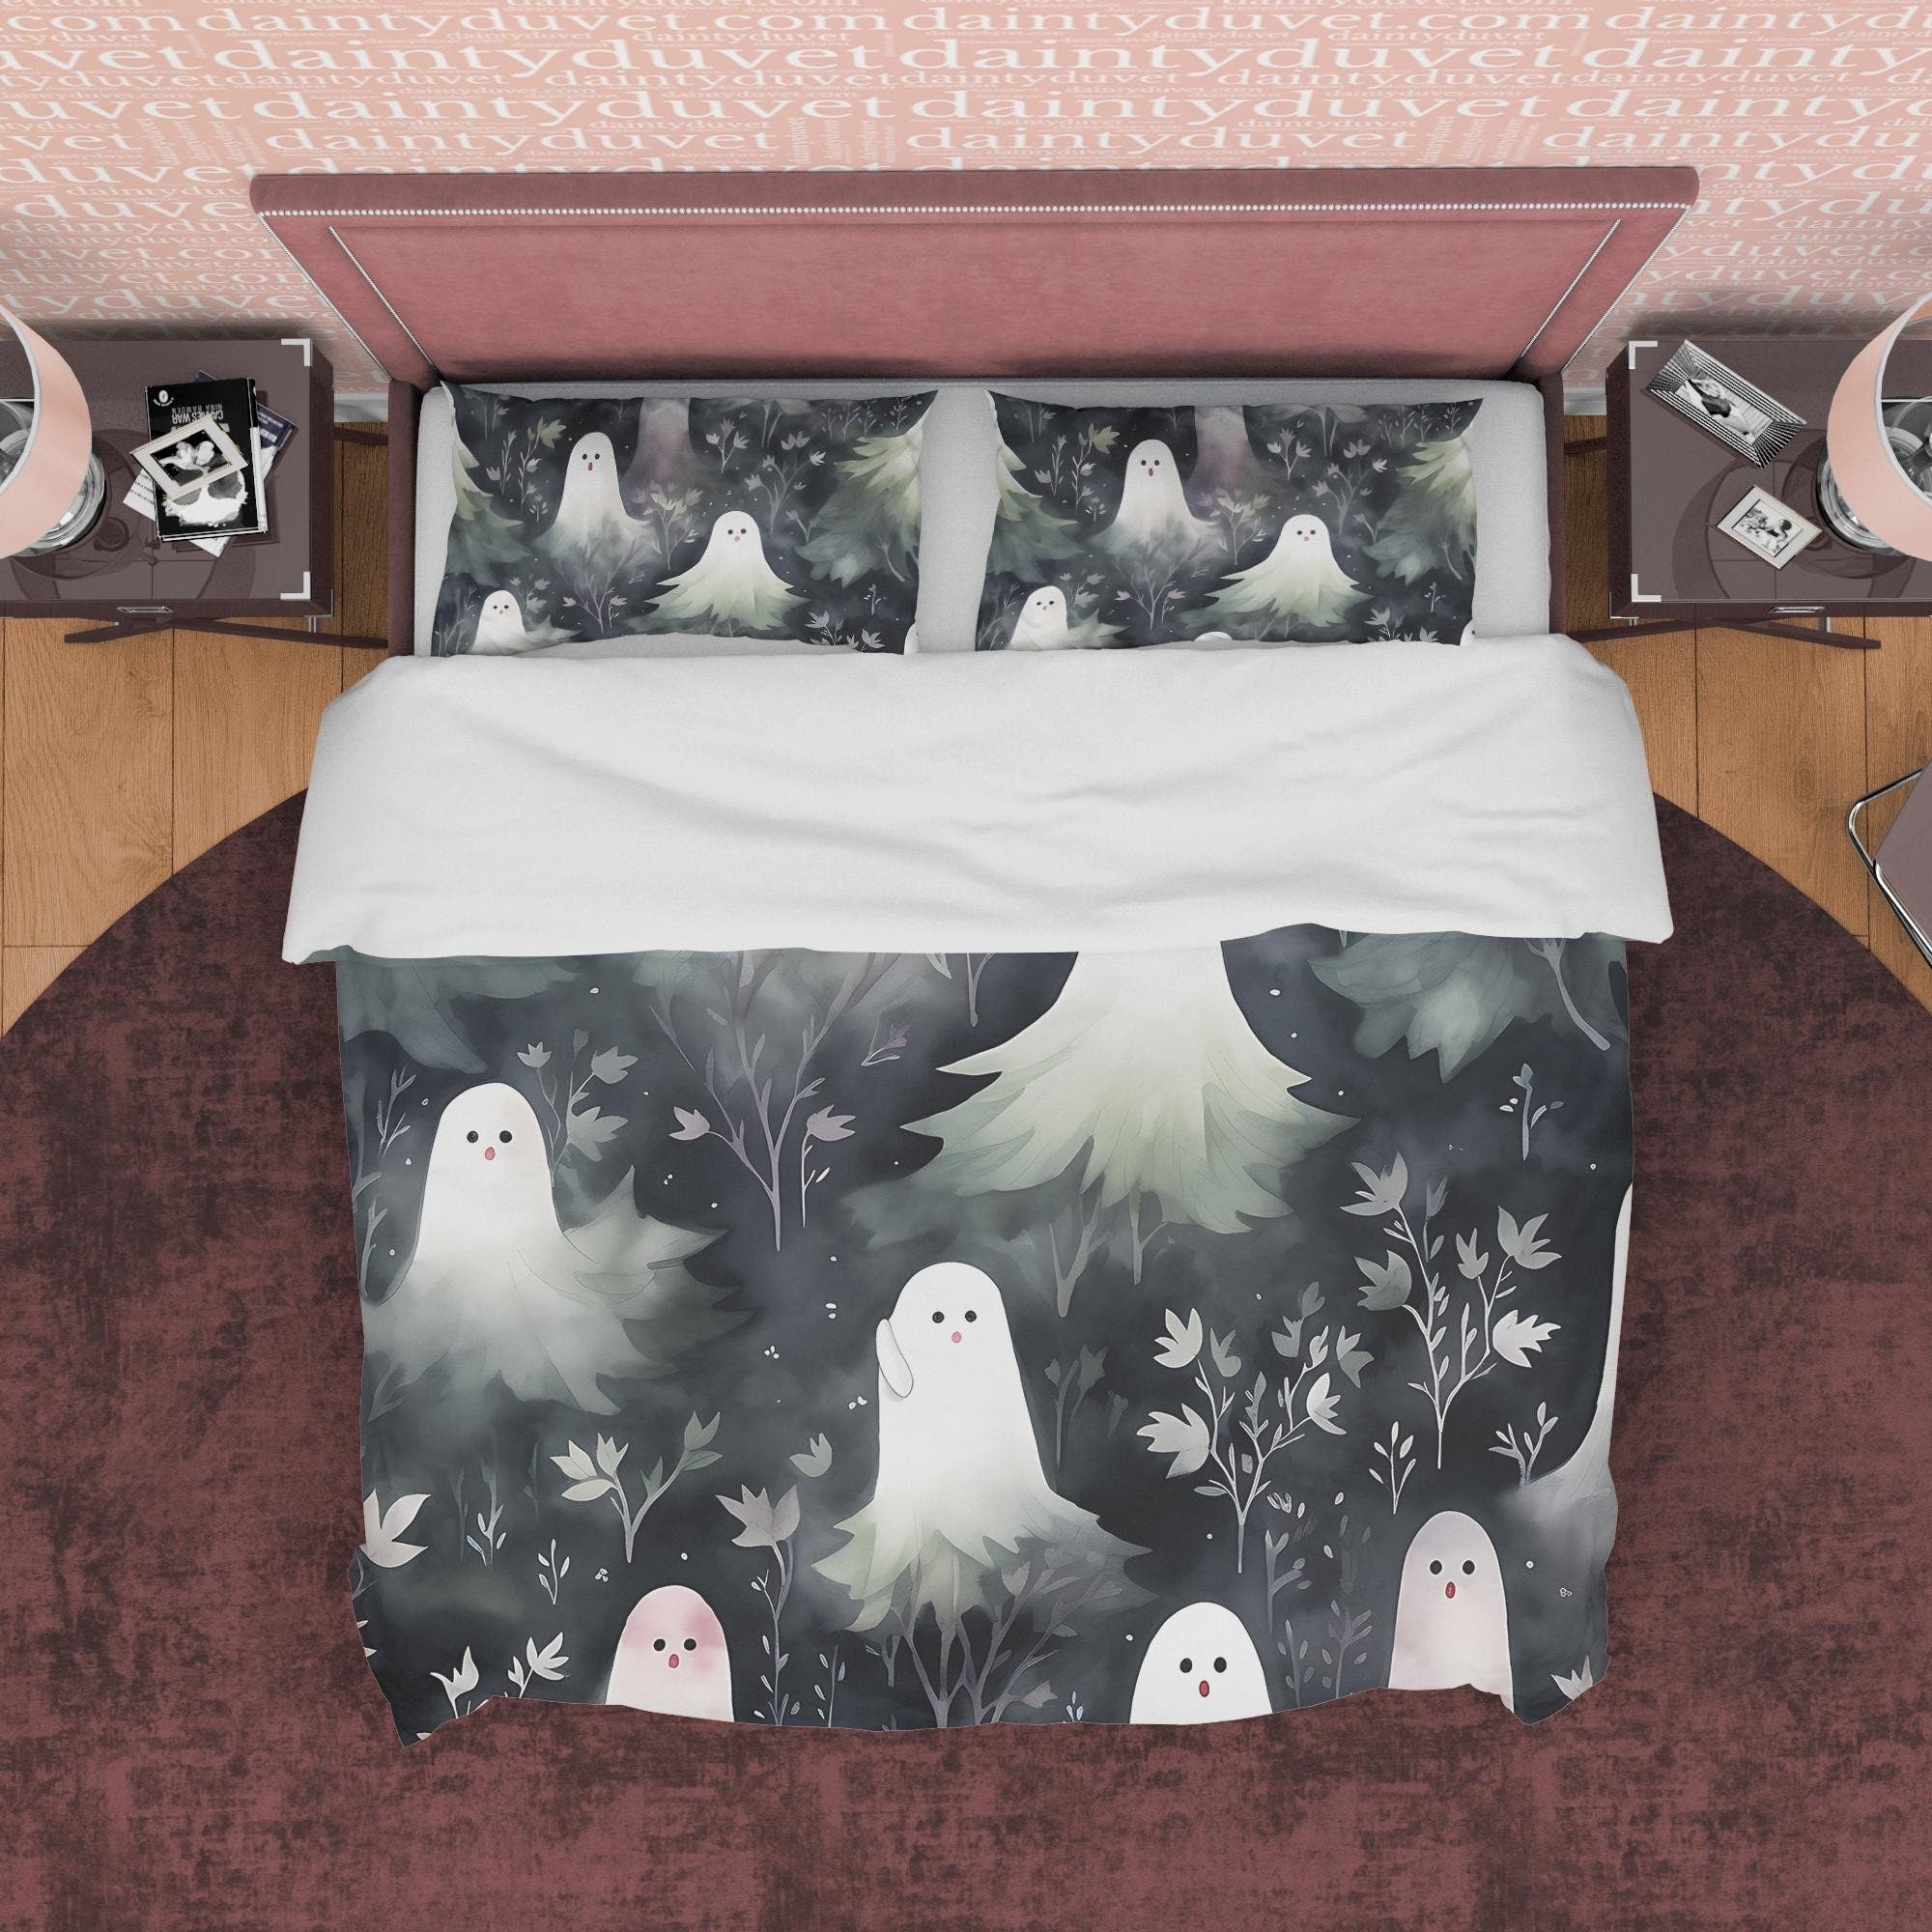 Black And White Ghost Duvet Cover Set, Creepy Quilt Cover Aesthetic Zipper Bedding, Haunted Forest Blanket Cover Halloween Room Decor